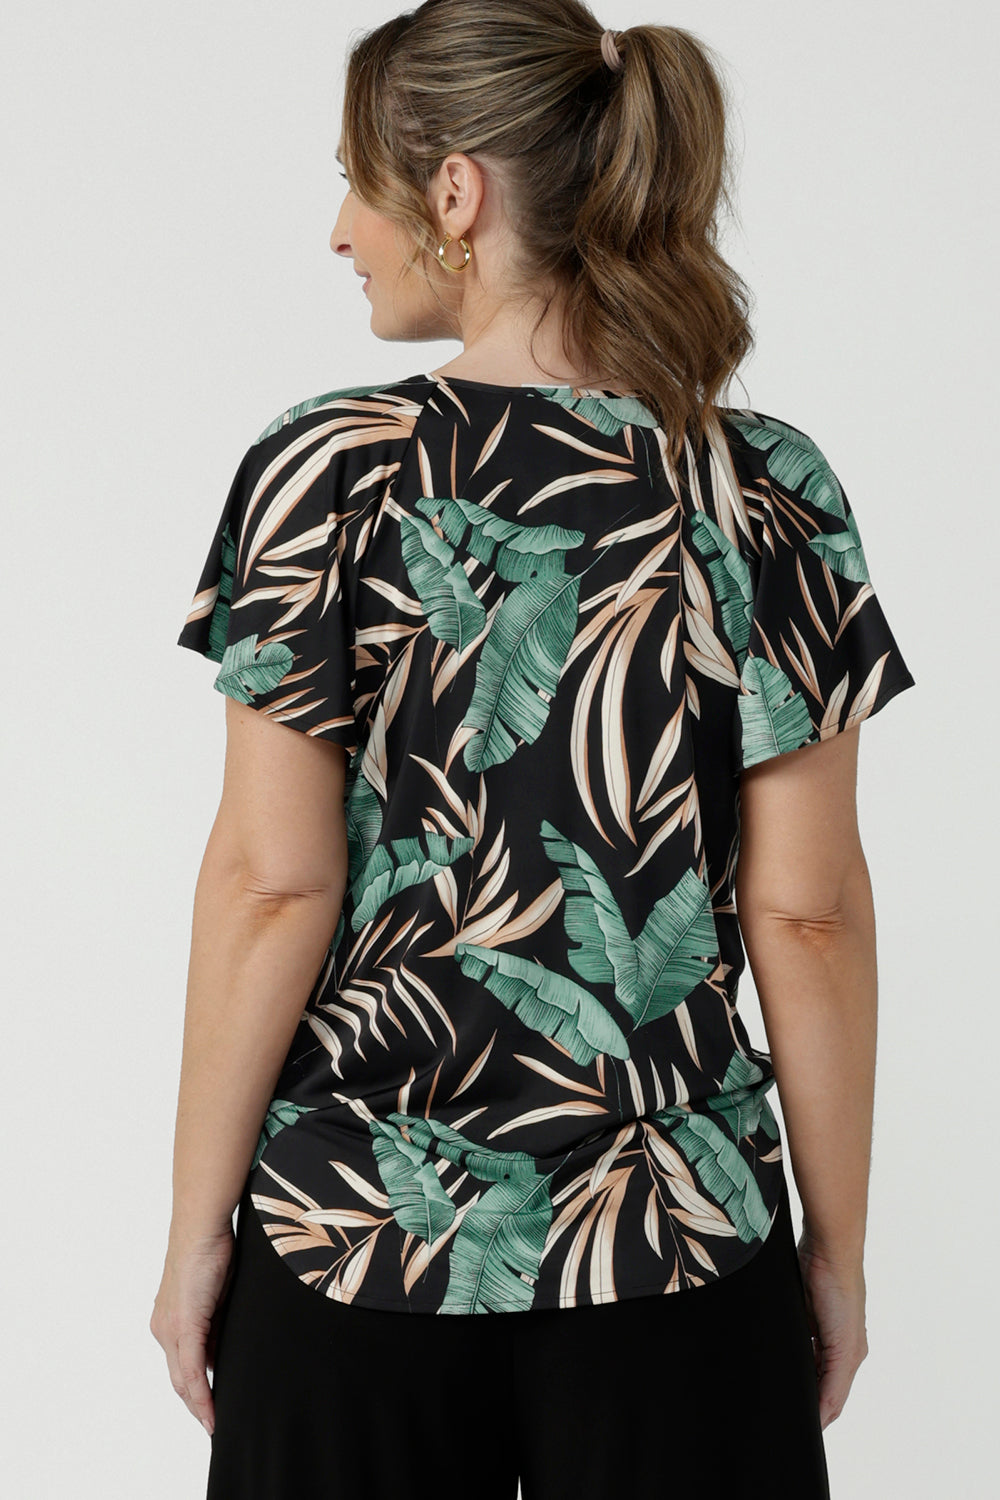 A flutter raglan sleeve jersey top with a flutter sleeve. Featuring a beautiful tropical print on a black background. Lightweight jersey cool to touch and easy care.